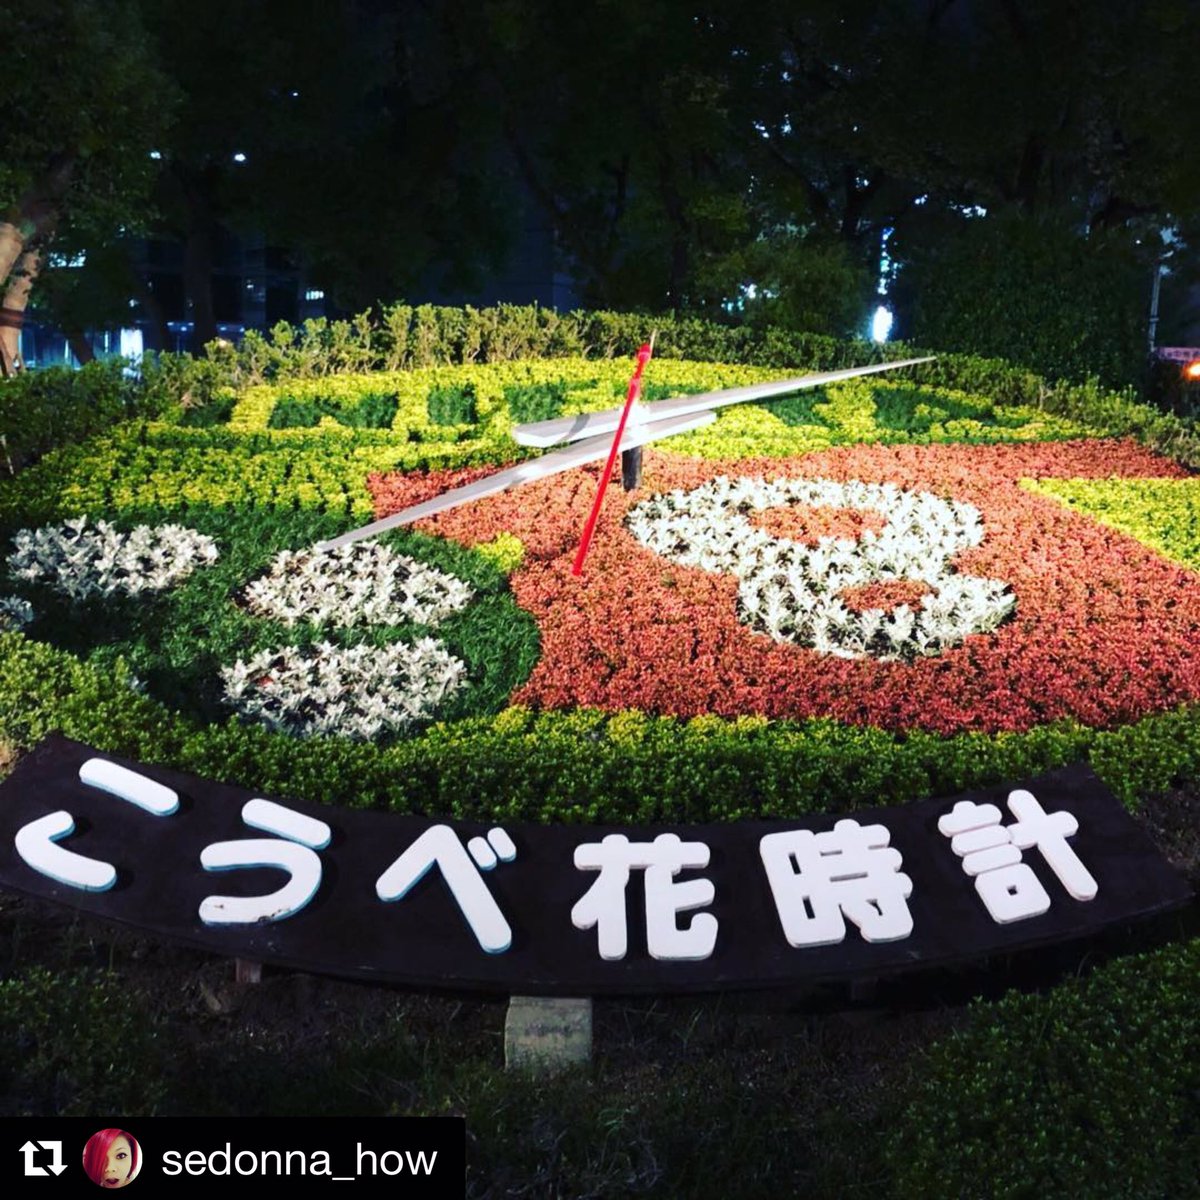 Kobe Pr Ambassadors Repost Sedonna How Have You Ever Seen The Kobe Flower Clock 神戸花時計 When It S Lit Up At Night It S Current Design Is Dedicated To Football Player Andres Iniesta